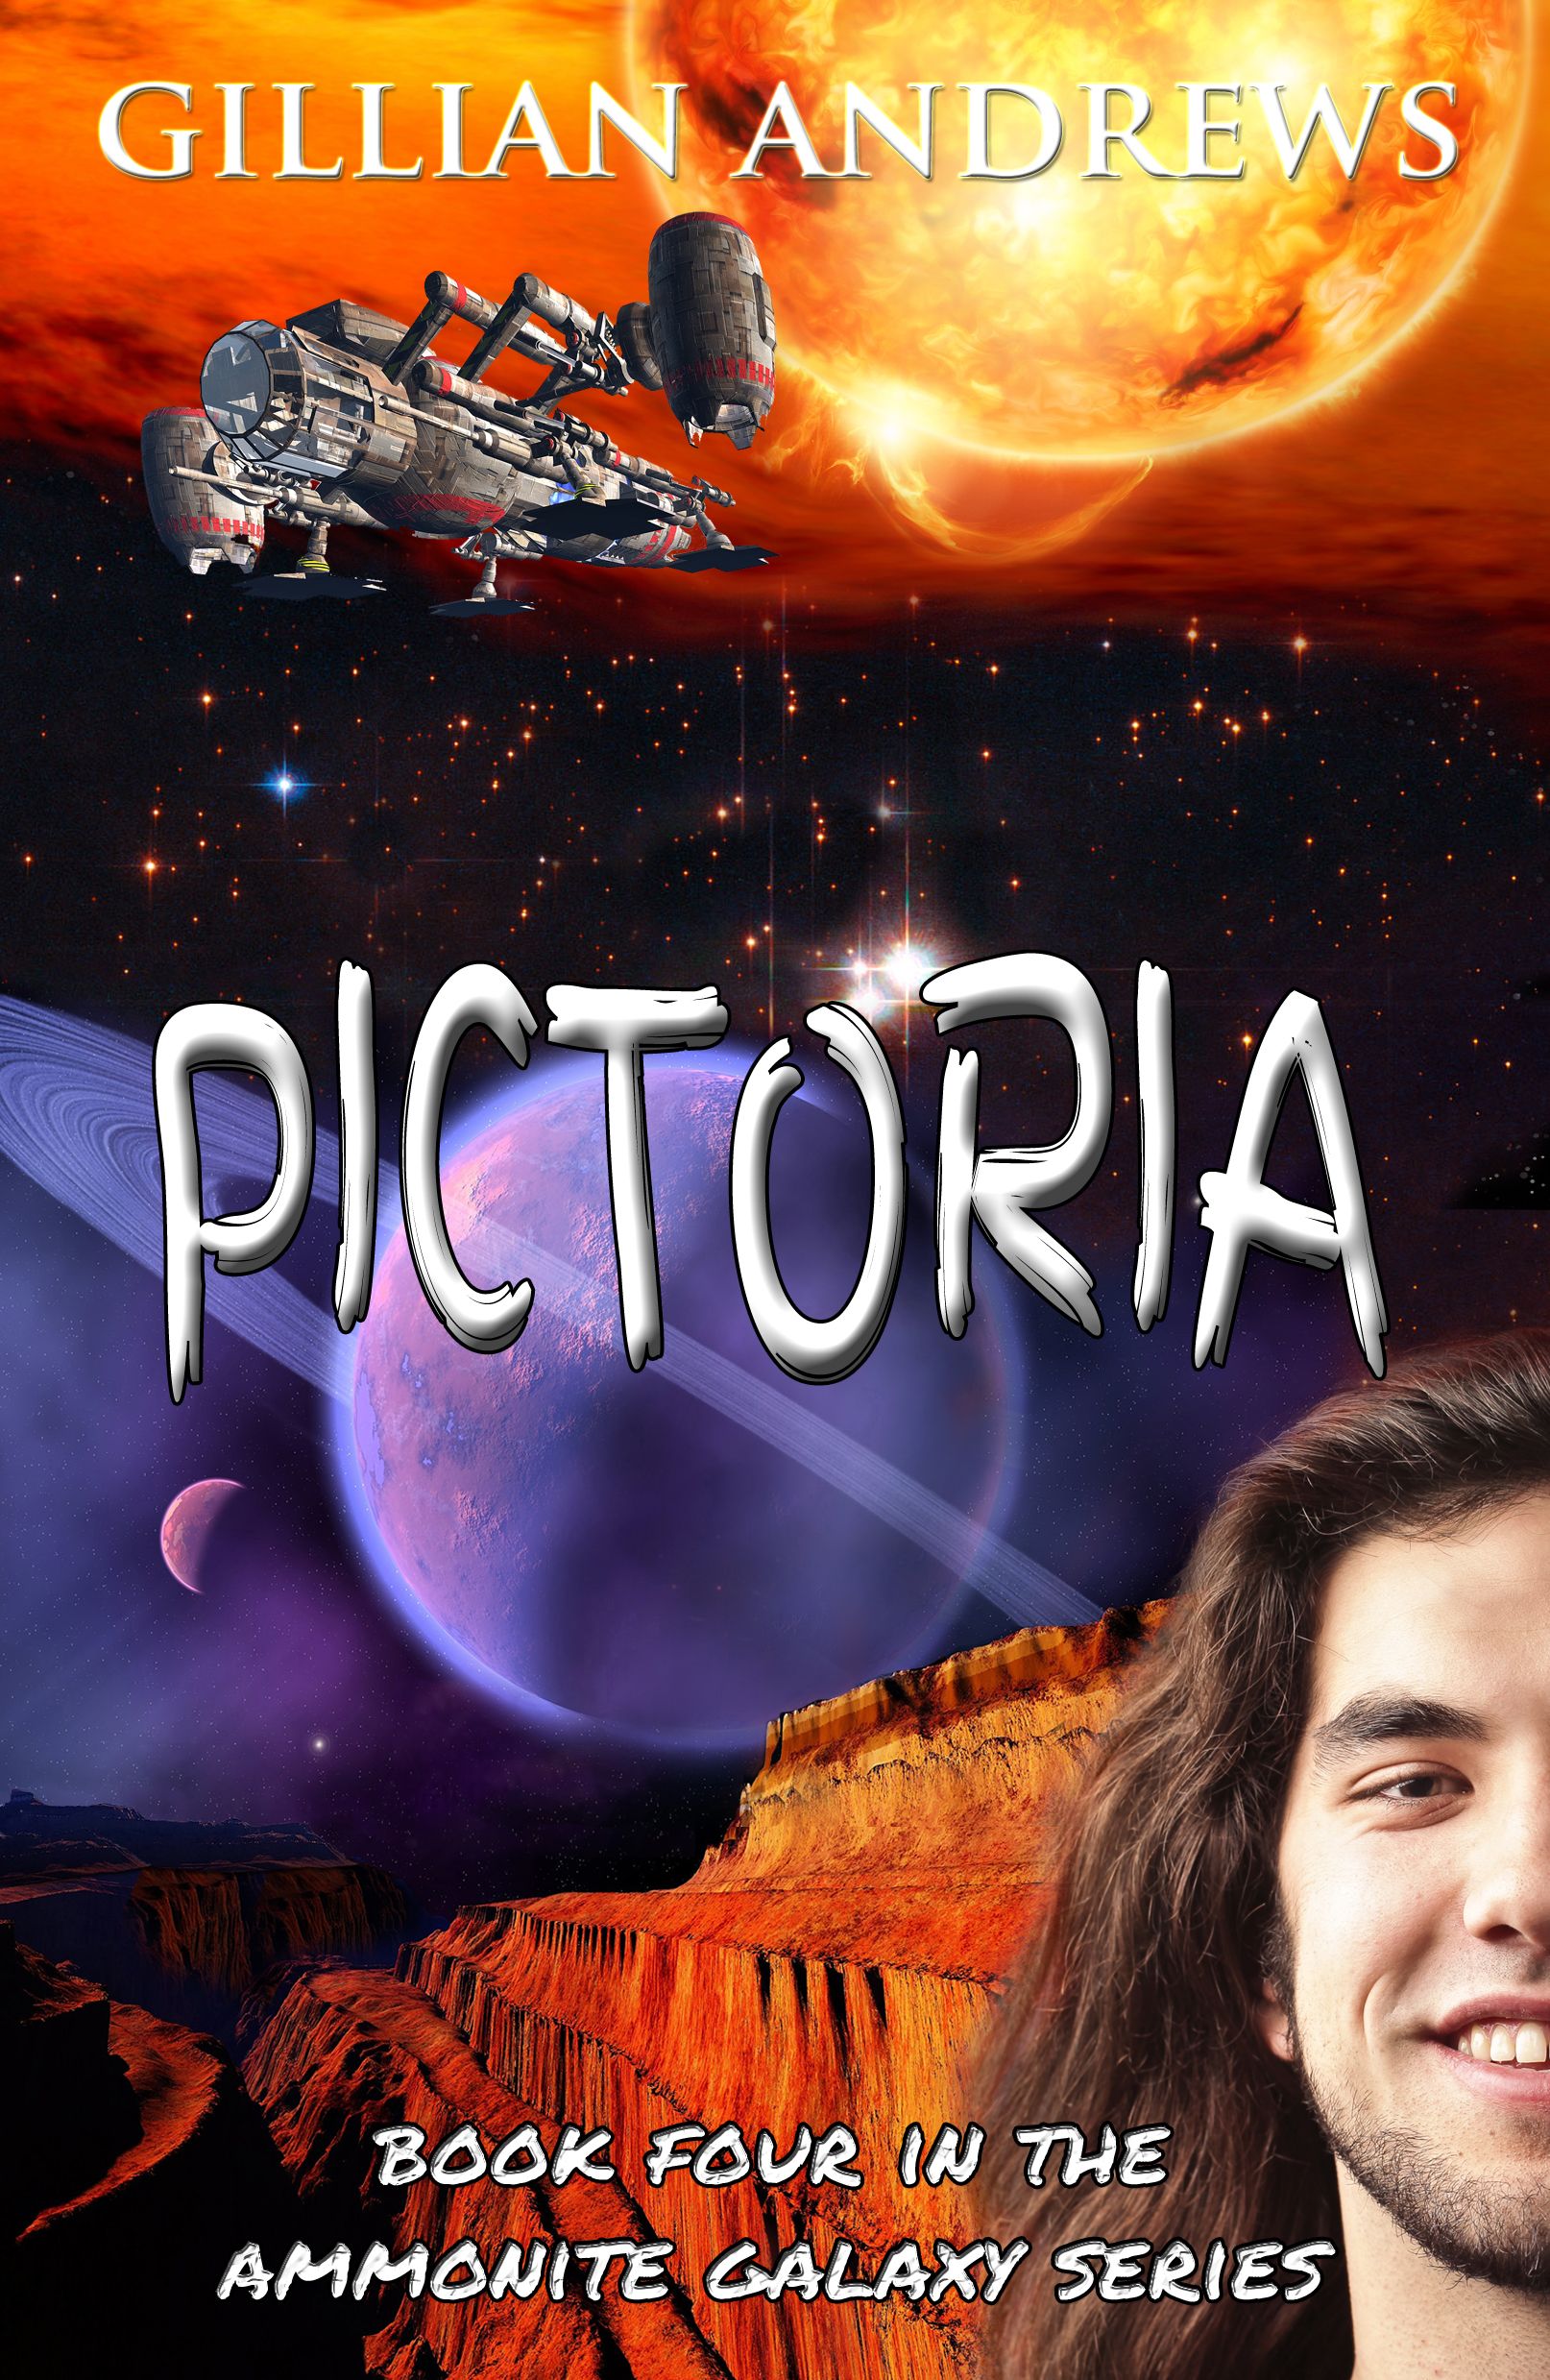 Full cover of Pictoria, Fourth book in the Ammonite Galaxy series, showing Ledin.